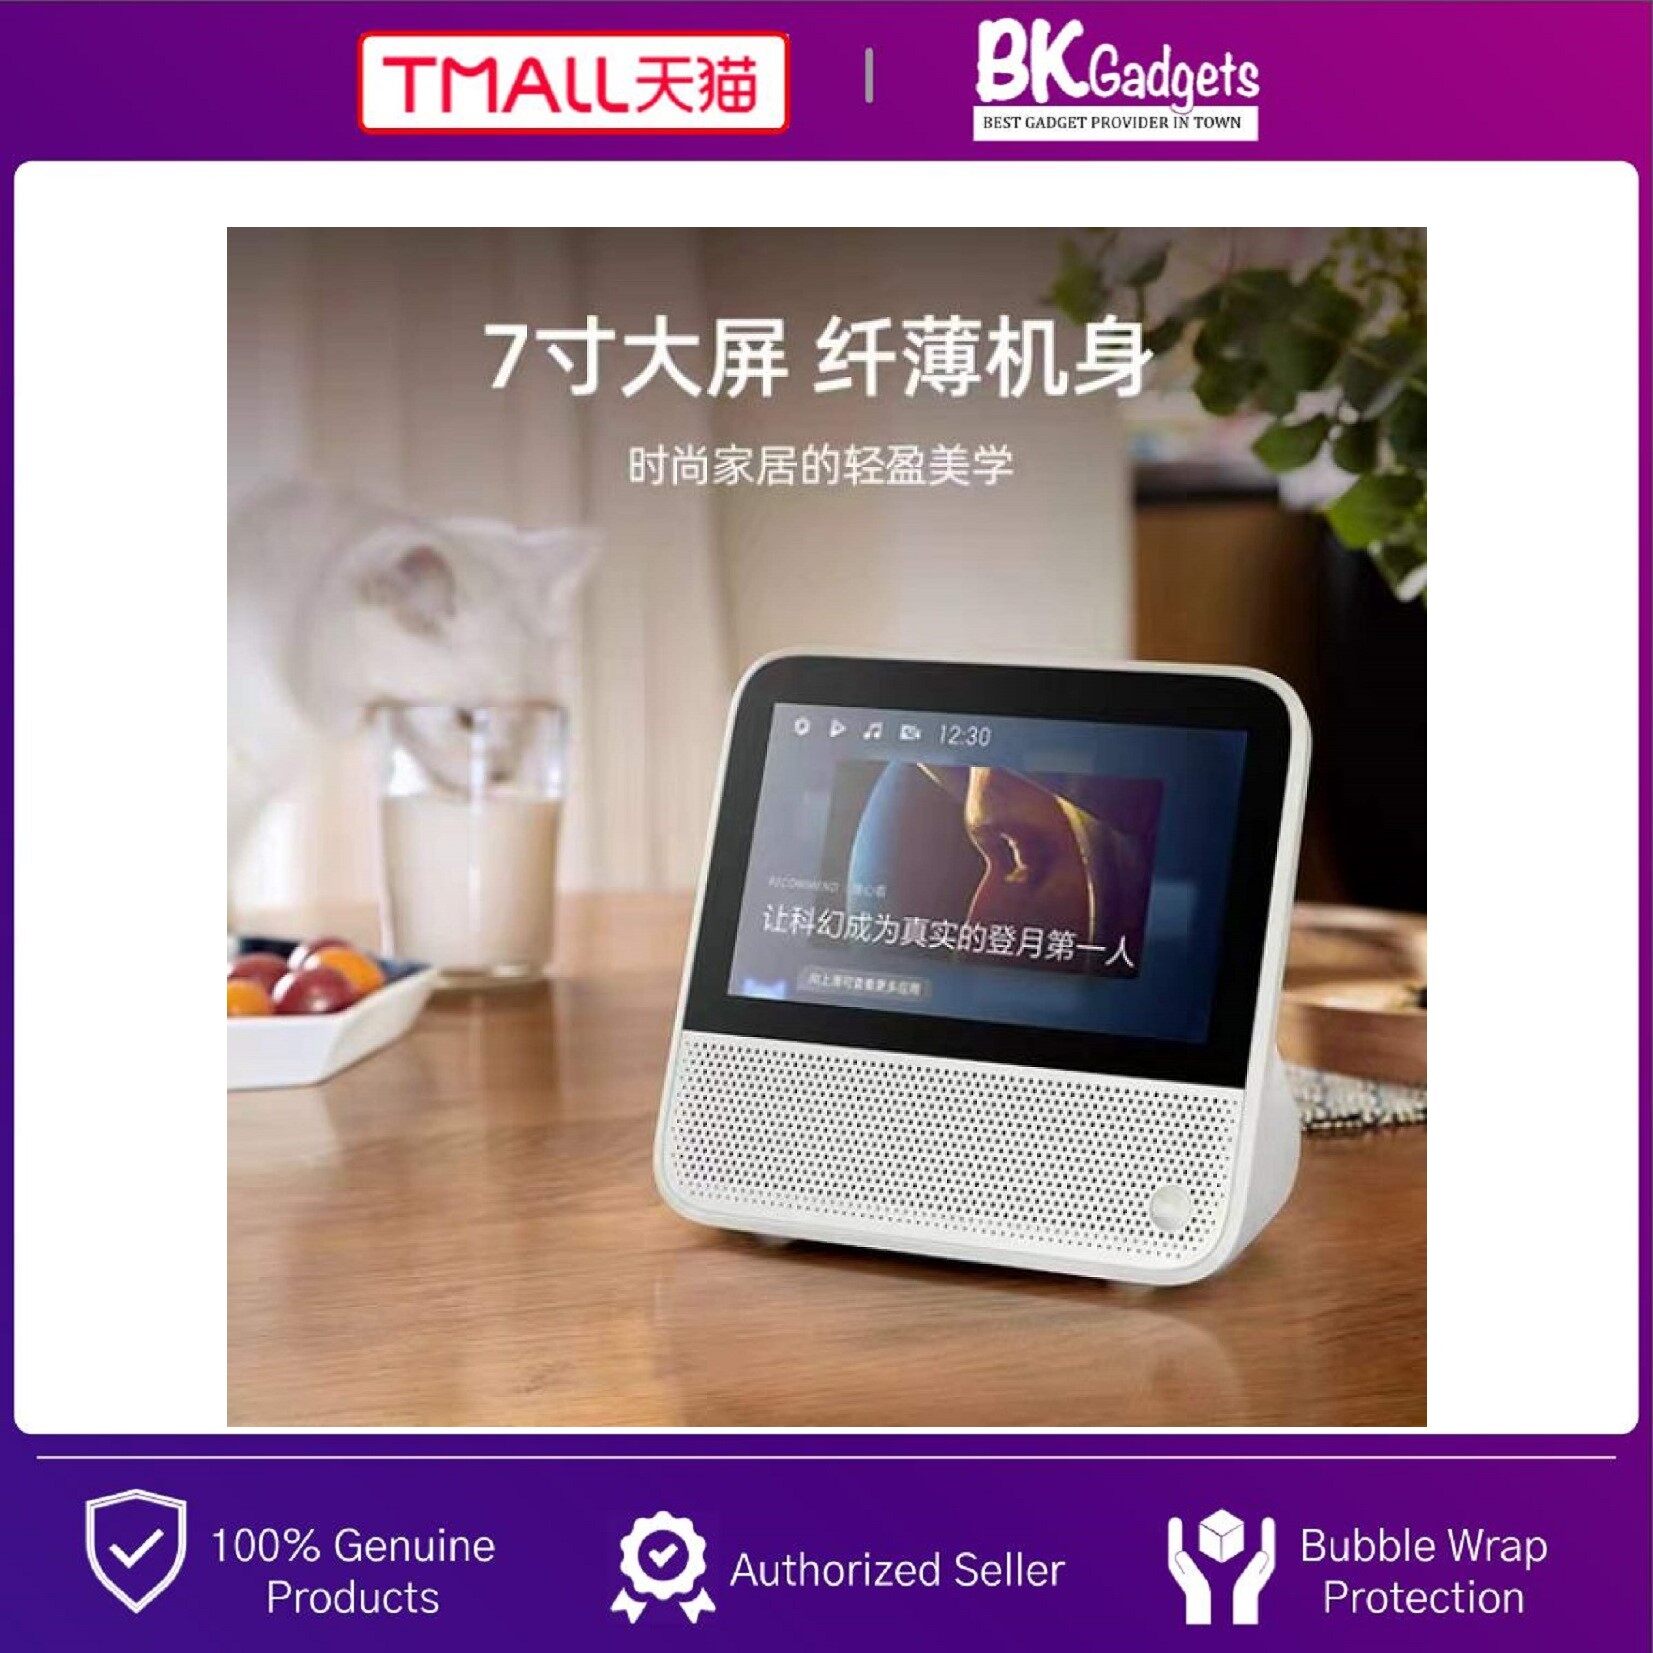 TMALL Genie CC10 Build in Tmall Genie Smart Assistant - Smart AI Speaker with 10 Inch LCD Display Touch Screen | Camera